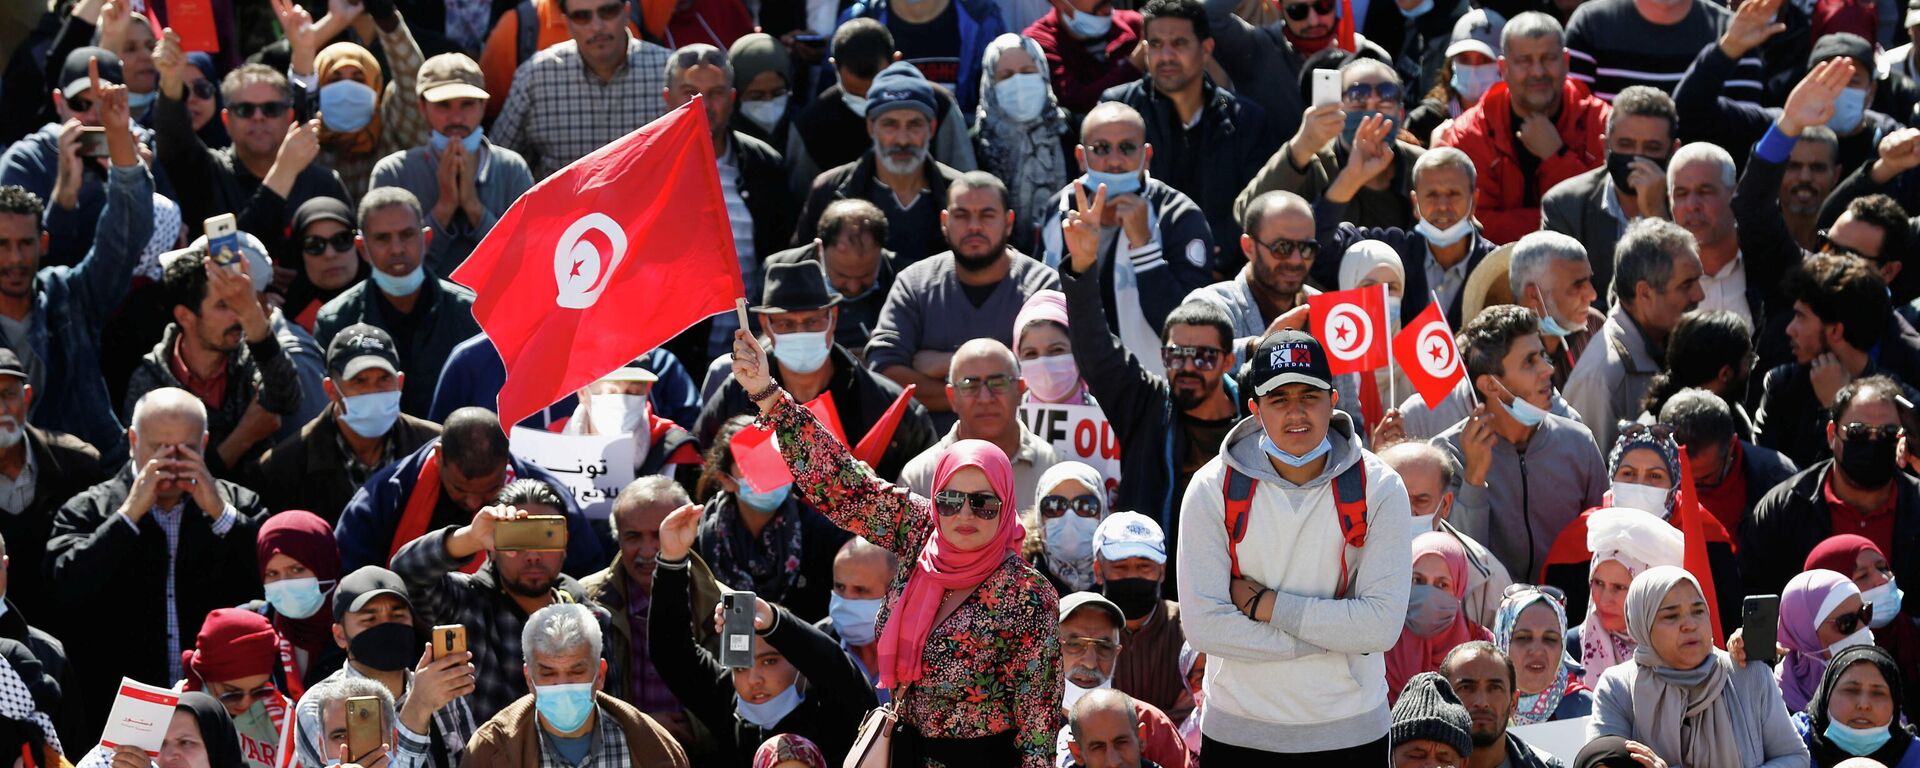 FILE PHOTO: Demonstrators hold flags during a protest against Tunisian President Kais Saied's seizure of governing powers, in front of the parliament, in Tunis, Tunisia, November 14, 2021 - Sputnik International, 1920, 17.12.2021